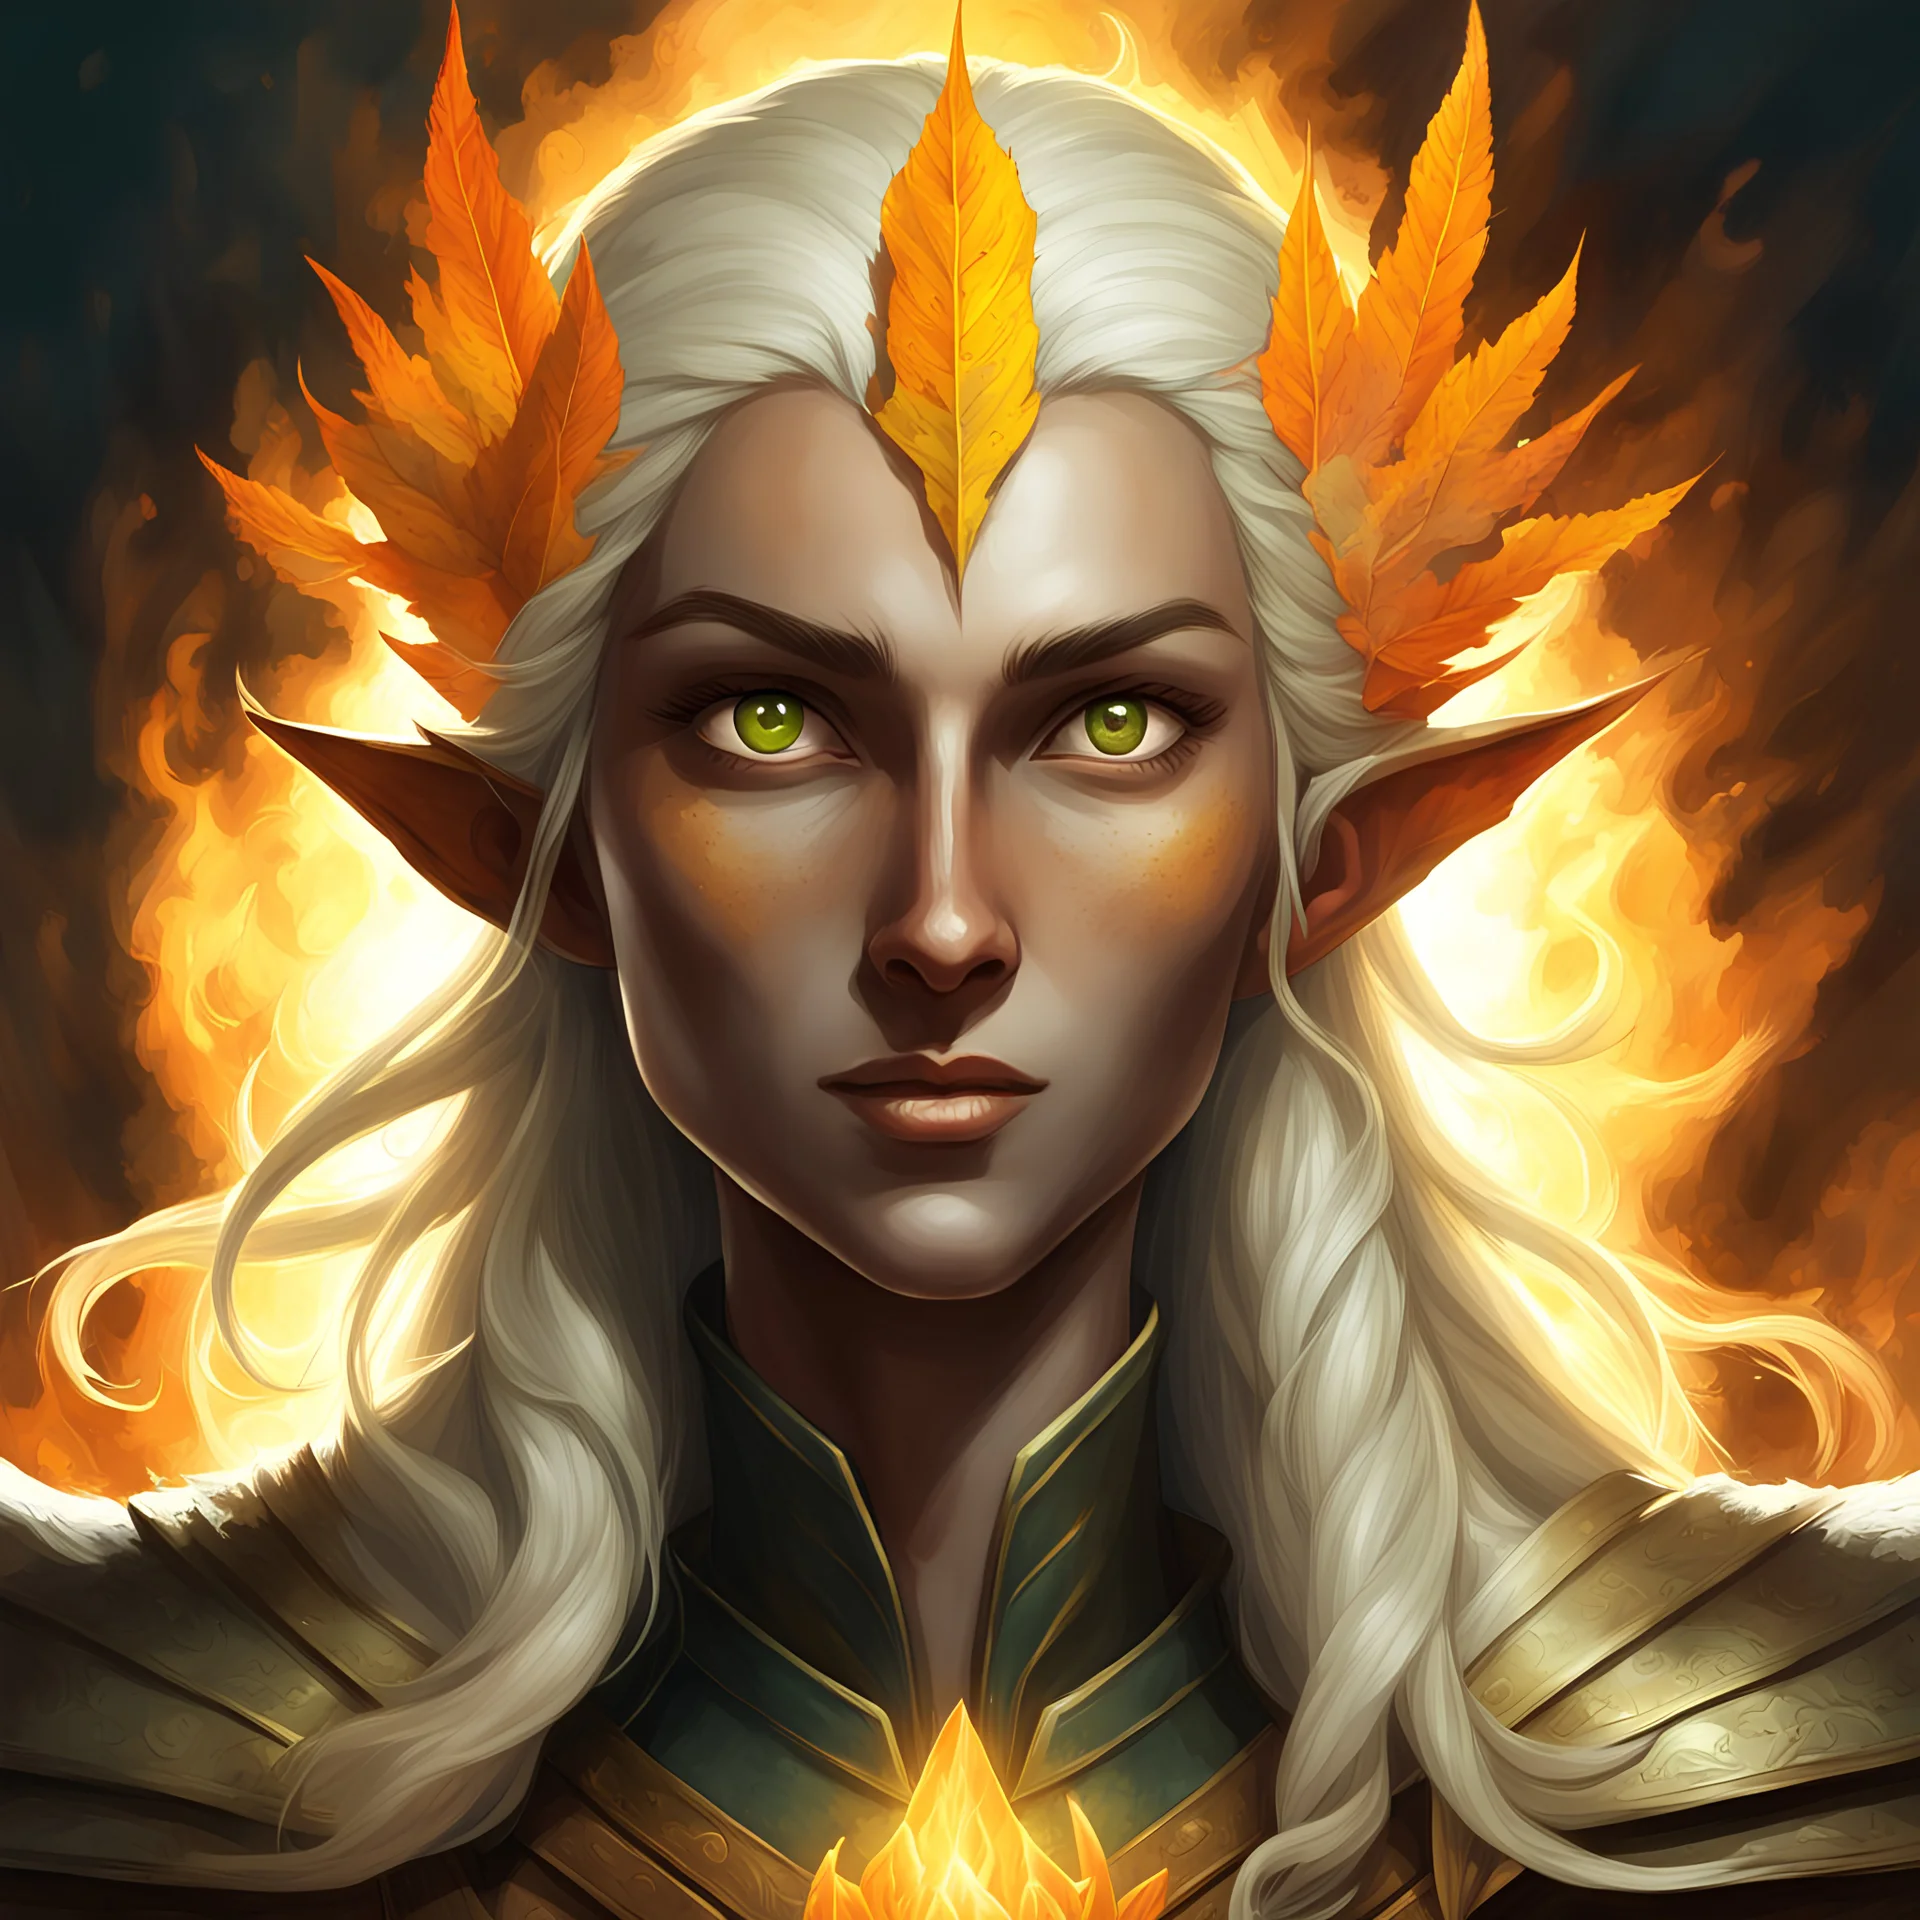 Generate a dungeons and dragons character portrait of the face of a female autumn Eladrin. She is a Grave Cleric. Her hair is the color of the sun and voluminous. Her skin is dark tan. Her eyes are yellow.